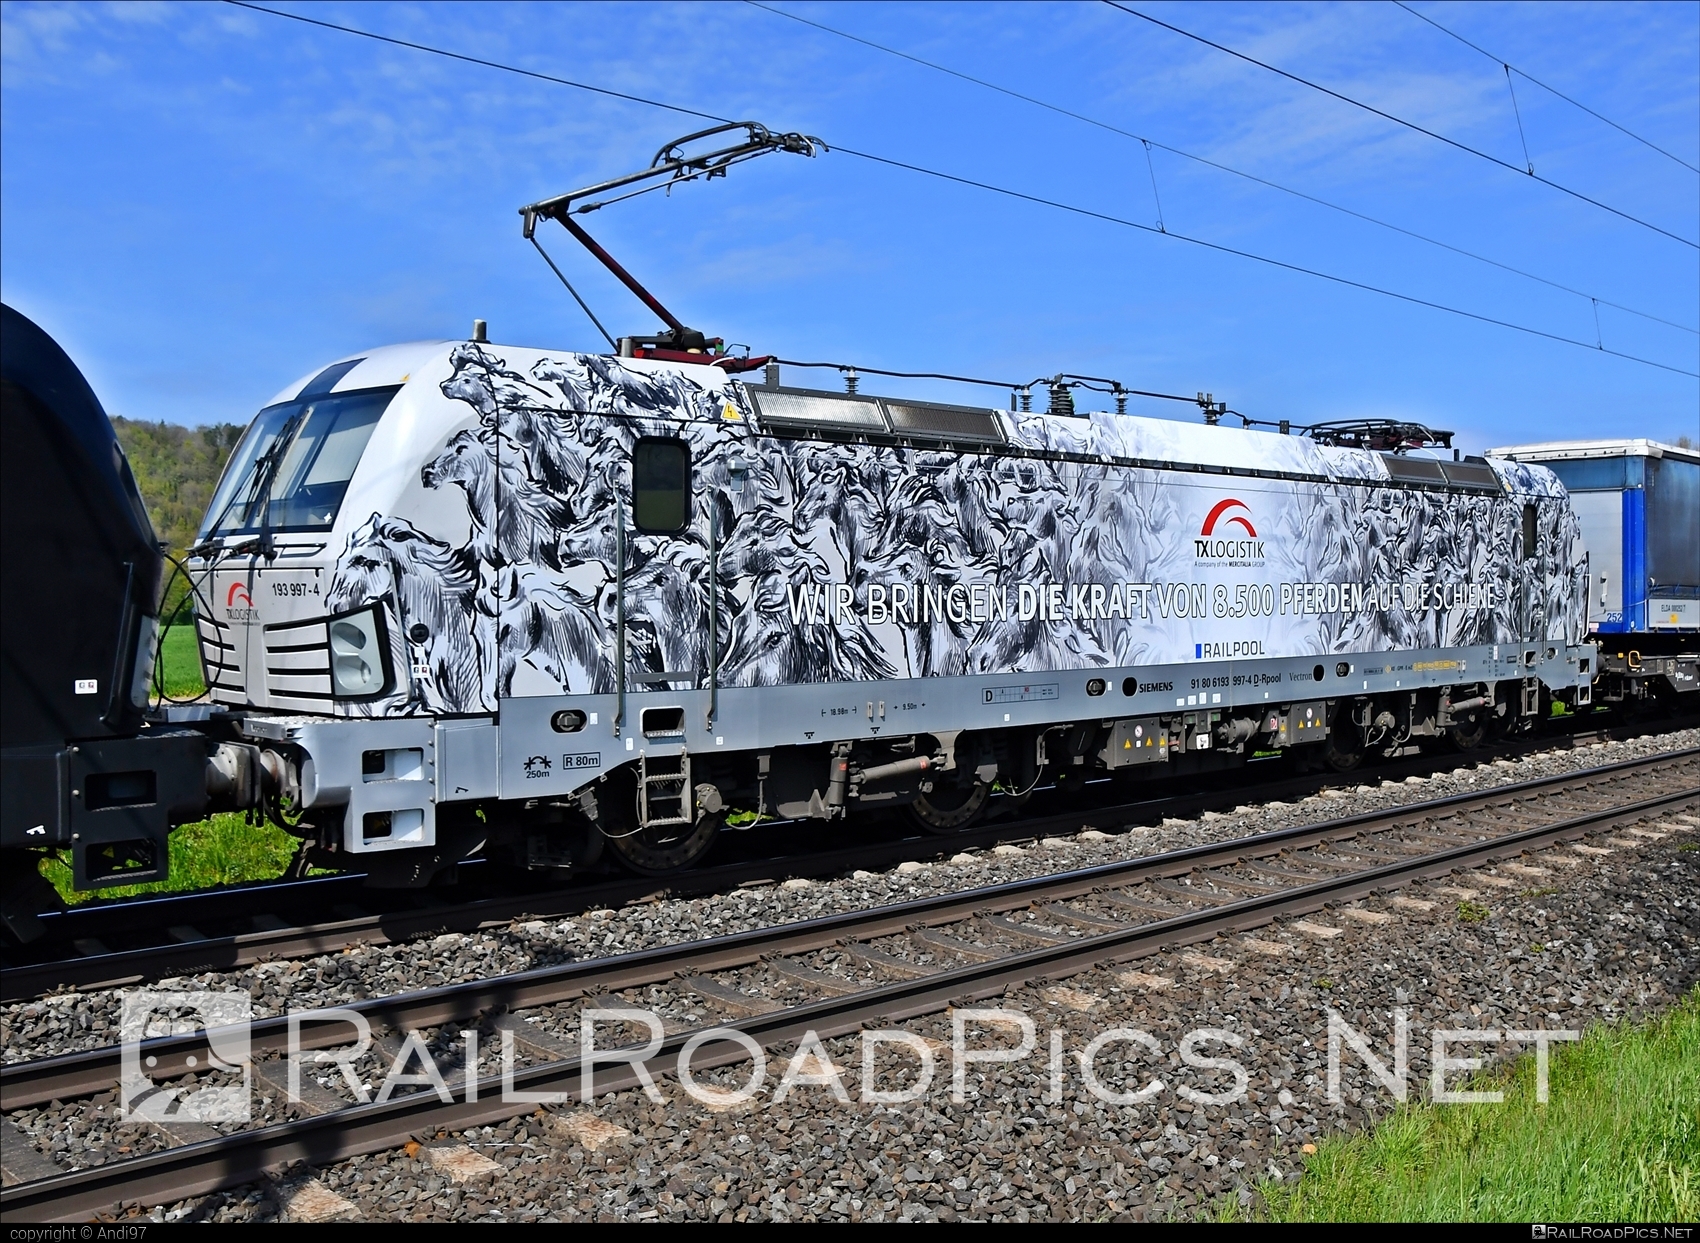 Siemens Vectron AC - 193 997-4 operated by TXLogistik #railpool #railpoolgmbh #siemens #siemensVectron #siemensVectronAC #txlogistik #vectron #vectronAC